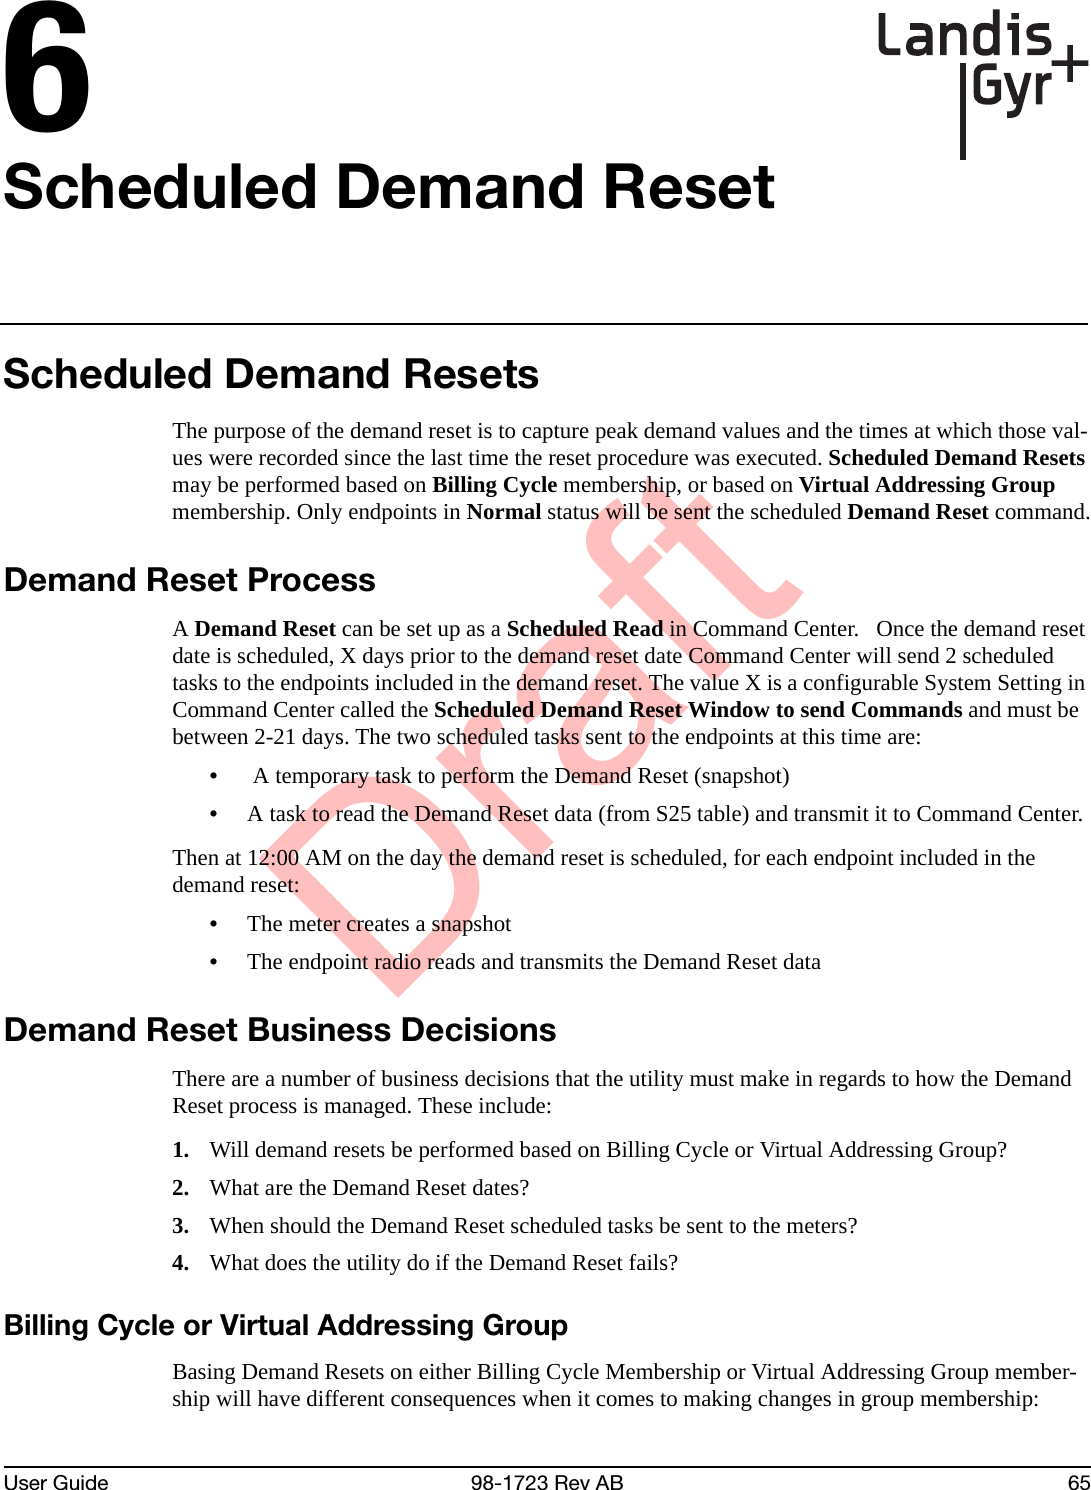 DraftUser Guide 98-1723 Rev AB 656Scheduled Demand ResetScheduled Demand ResetsThe purpose of the demand reset is to capture peak demand values and the times at which those val-ues were recorded since the last time the reset procedure was executed. Scheduled Demand Resets may be performed based on Billing Cycle membership, or based on Virtual Addressing Group membership. Only endpoints in Normal status will be sent the scheduled Demand Reset command.Demand Reset ProcessA Demand Reset can be set up as a Scheduled Read in Command Center.   Once the demand reset date is scheduled, X days prior to the demand reset date Command Center will send 2 scheduled tasks to the endpoints included in the demand reset. The value X is a configurable System Setting in Command Center called the Scheduled Demand Reset Window to send Commands and must be between 2-21 days. The two scheduled tasks sent to the endpoints at this time are:• A temporary task to perform the Demand Reset (snapshot) •A task to read the Demand Reset data (from S25 table) and transmit it to Command Center. Then at 12:00 AM on the day the demand reset is scheduled, for each endpoint included in the demand reset:•The meter creates a snapshot•The endpoint radio reads and transmits the Demand Reset dataDemand Reset Business DecisionsThere are a number of business decisions that the utility must make in regards to how the Demand Reset process is managed. These include:1. Will demand resets be performed based on Billing Cycle or Virtual Addressing Group?2. What are the Demand Reset dates?3. When should the Demand Reset scheduled tasks be sent to the meters?4. What does the utility do if the Demand Reset fails?Billing Cycle or Virtual Addressing GroupBasing Demand Resets on either Billing Cycle Membership or Virtual Addressing Group member-ship will have different consequences when it comes to making changes in group membership: 